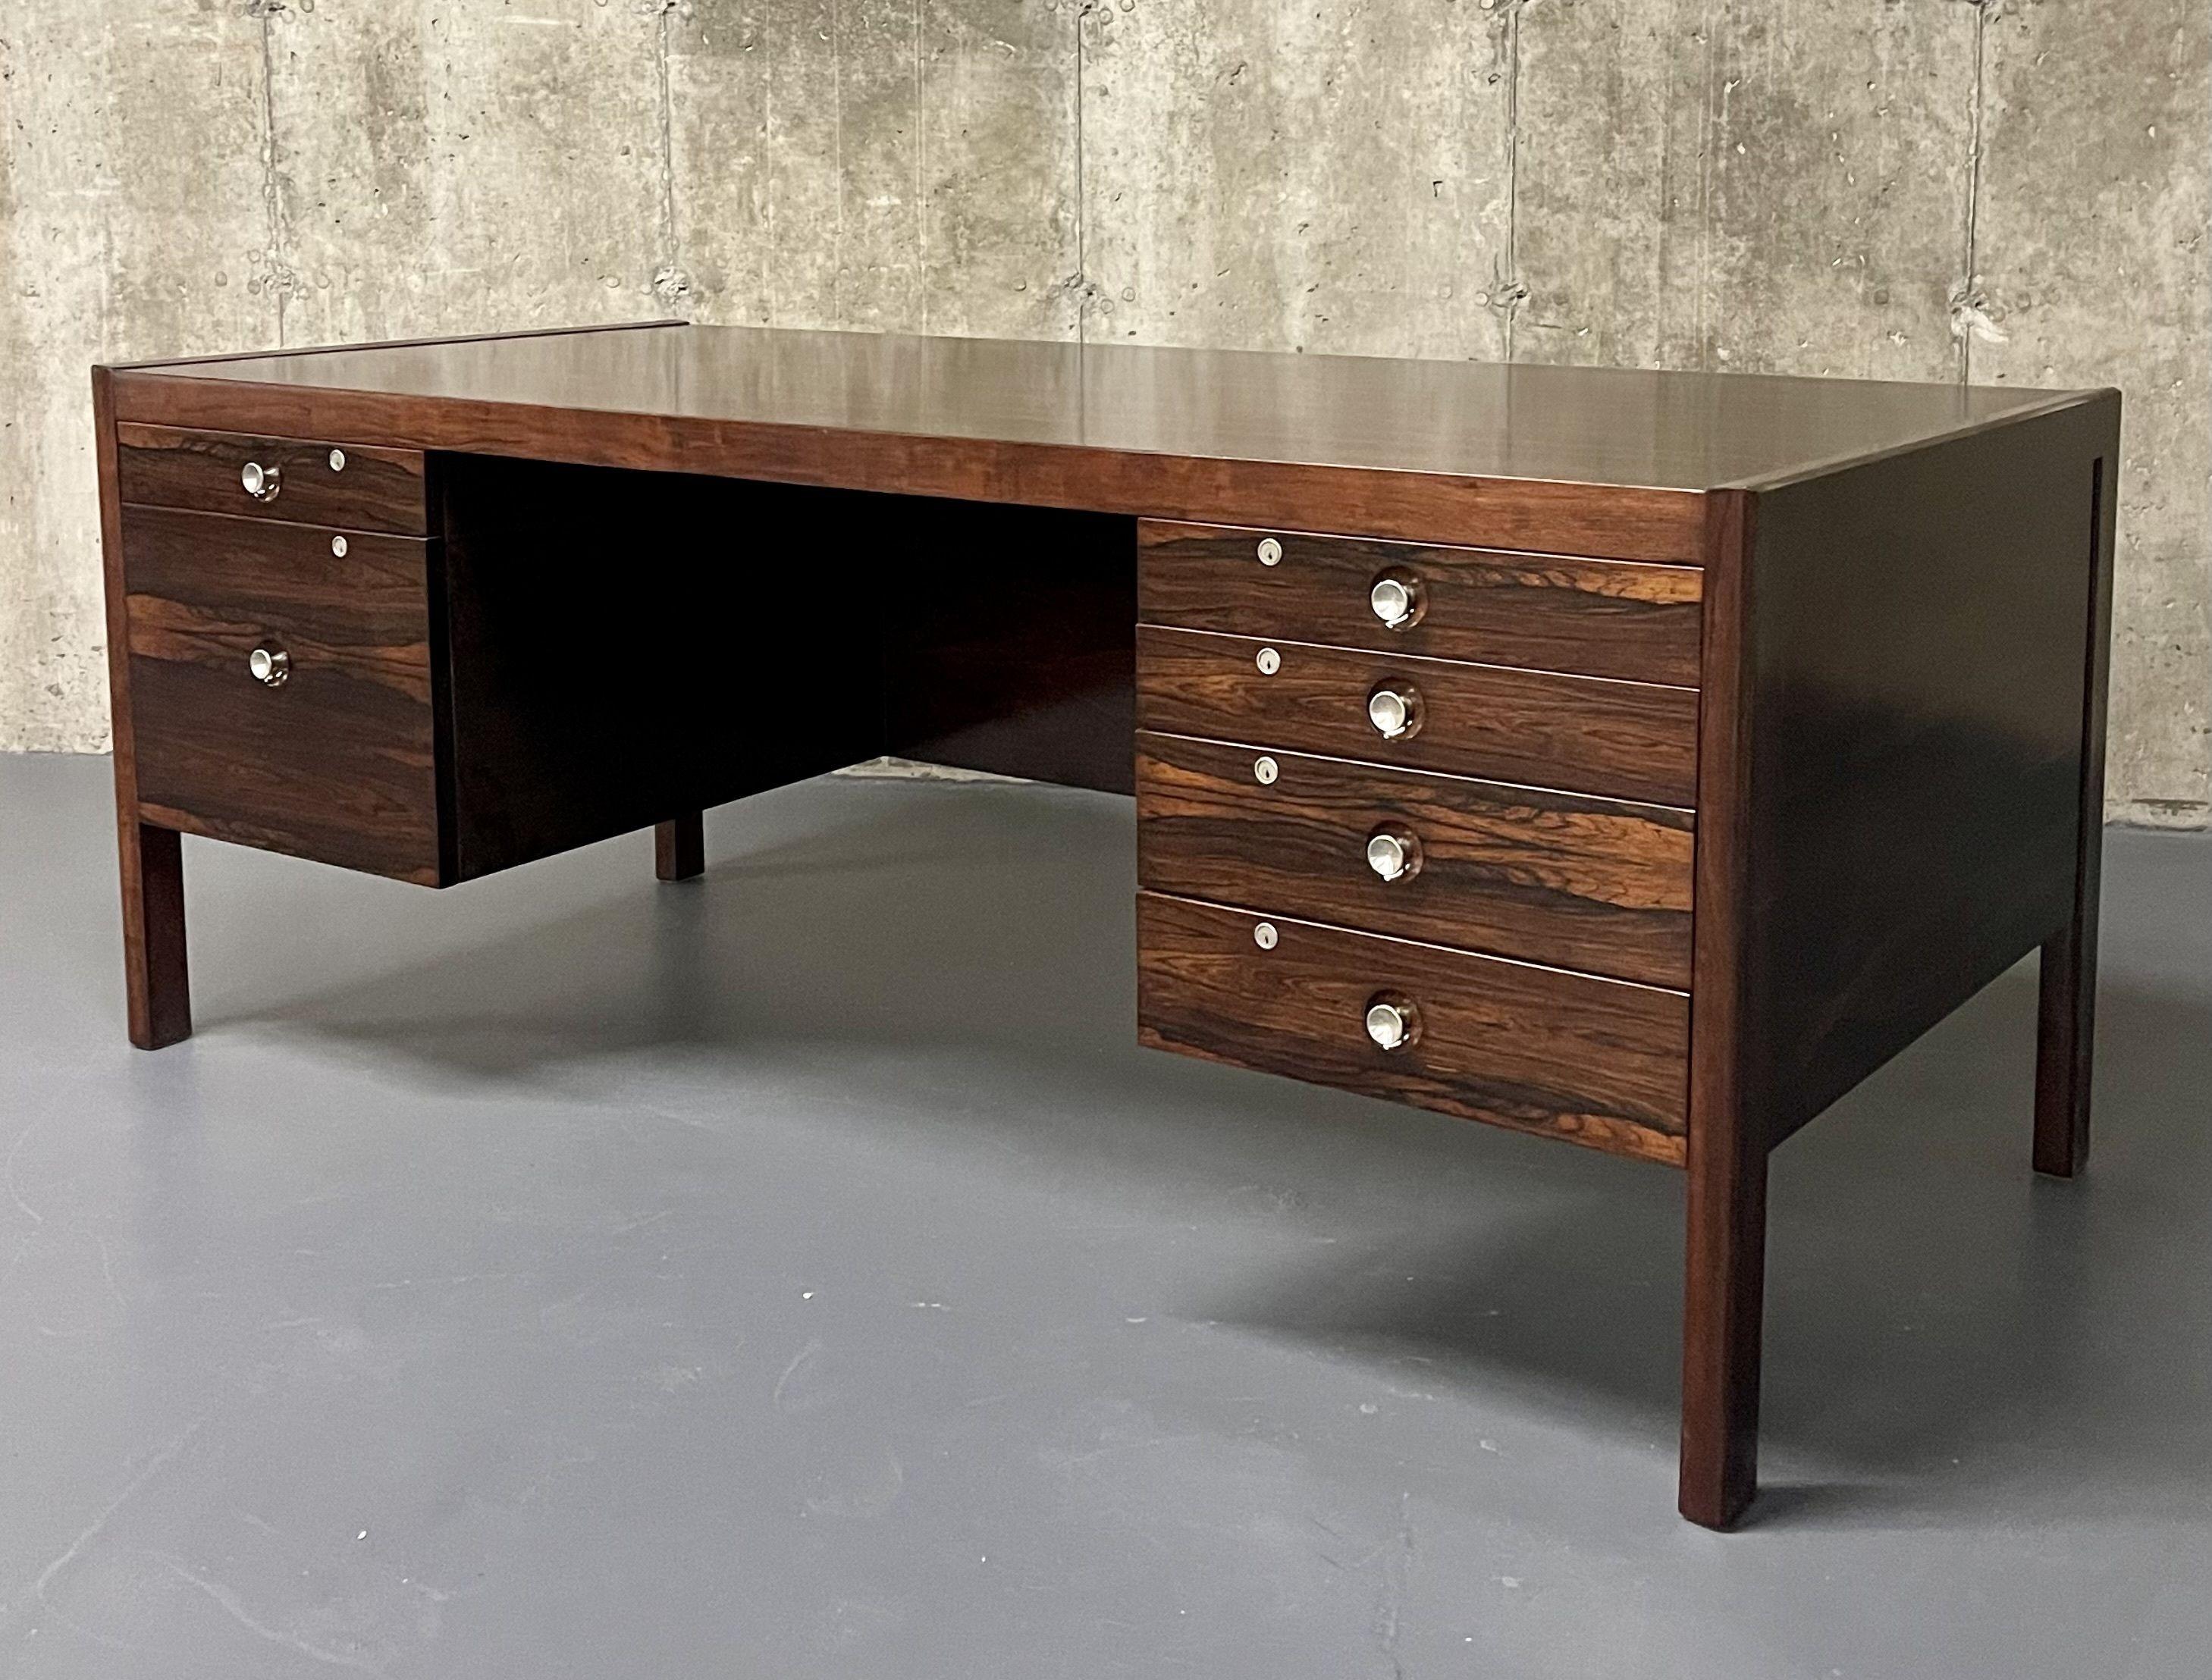 Mid-Century Modern Rosewood Knee Hole Desk, Writing Table, Chrome Accents, Refinished, Danish, Finn Juhl Style

A large and impressive Finn Juhl Style solid Rosewood desk having recently been finely finished. This spectacular desk is simply stunning